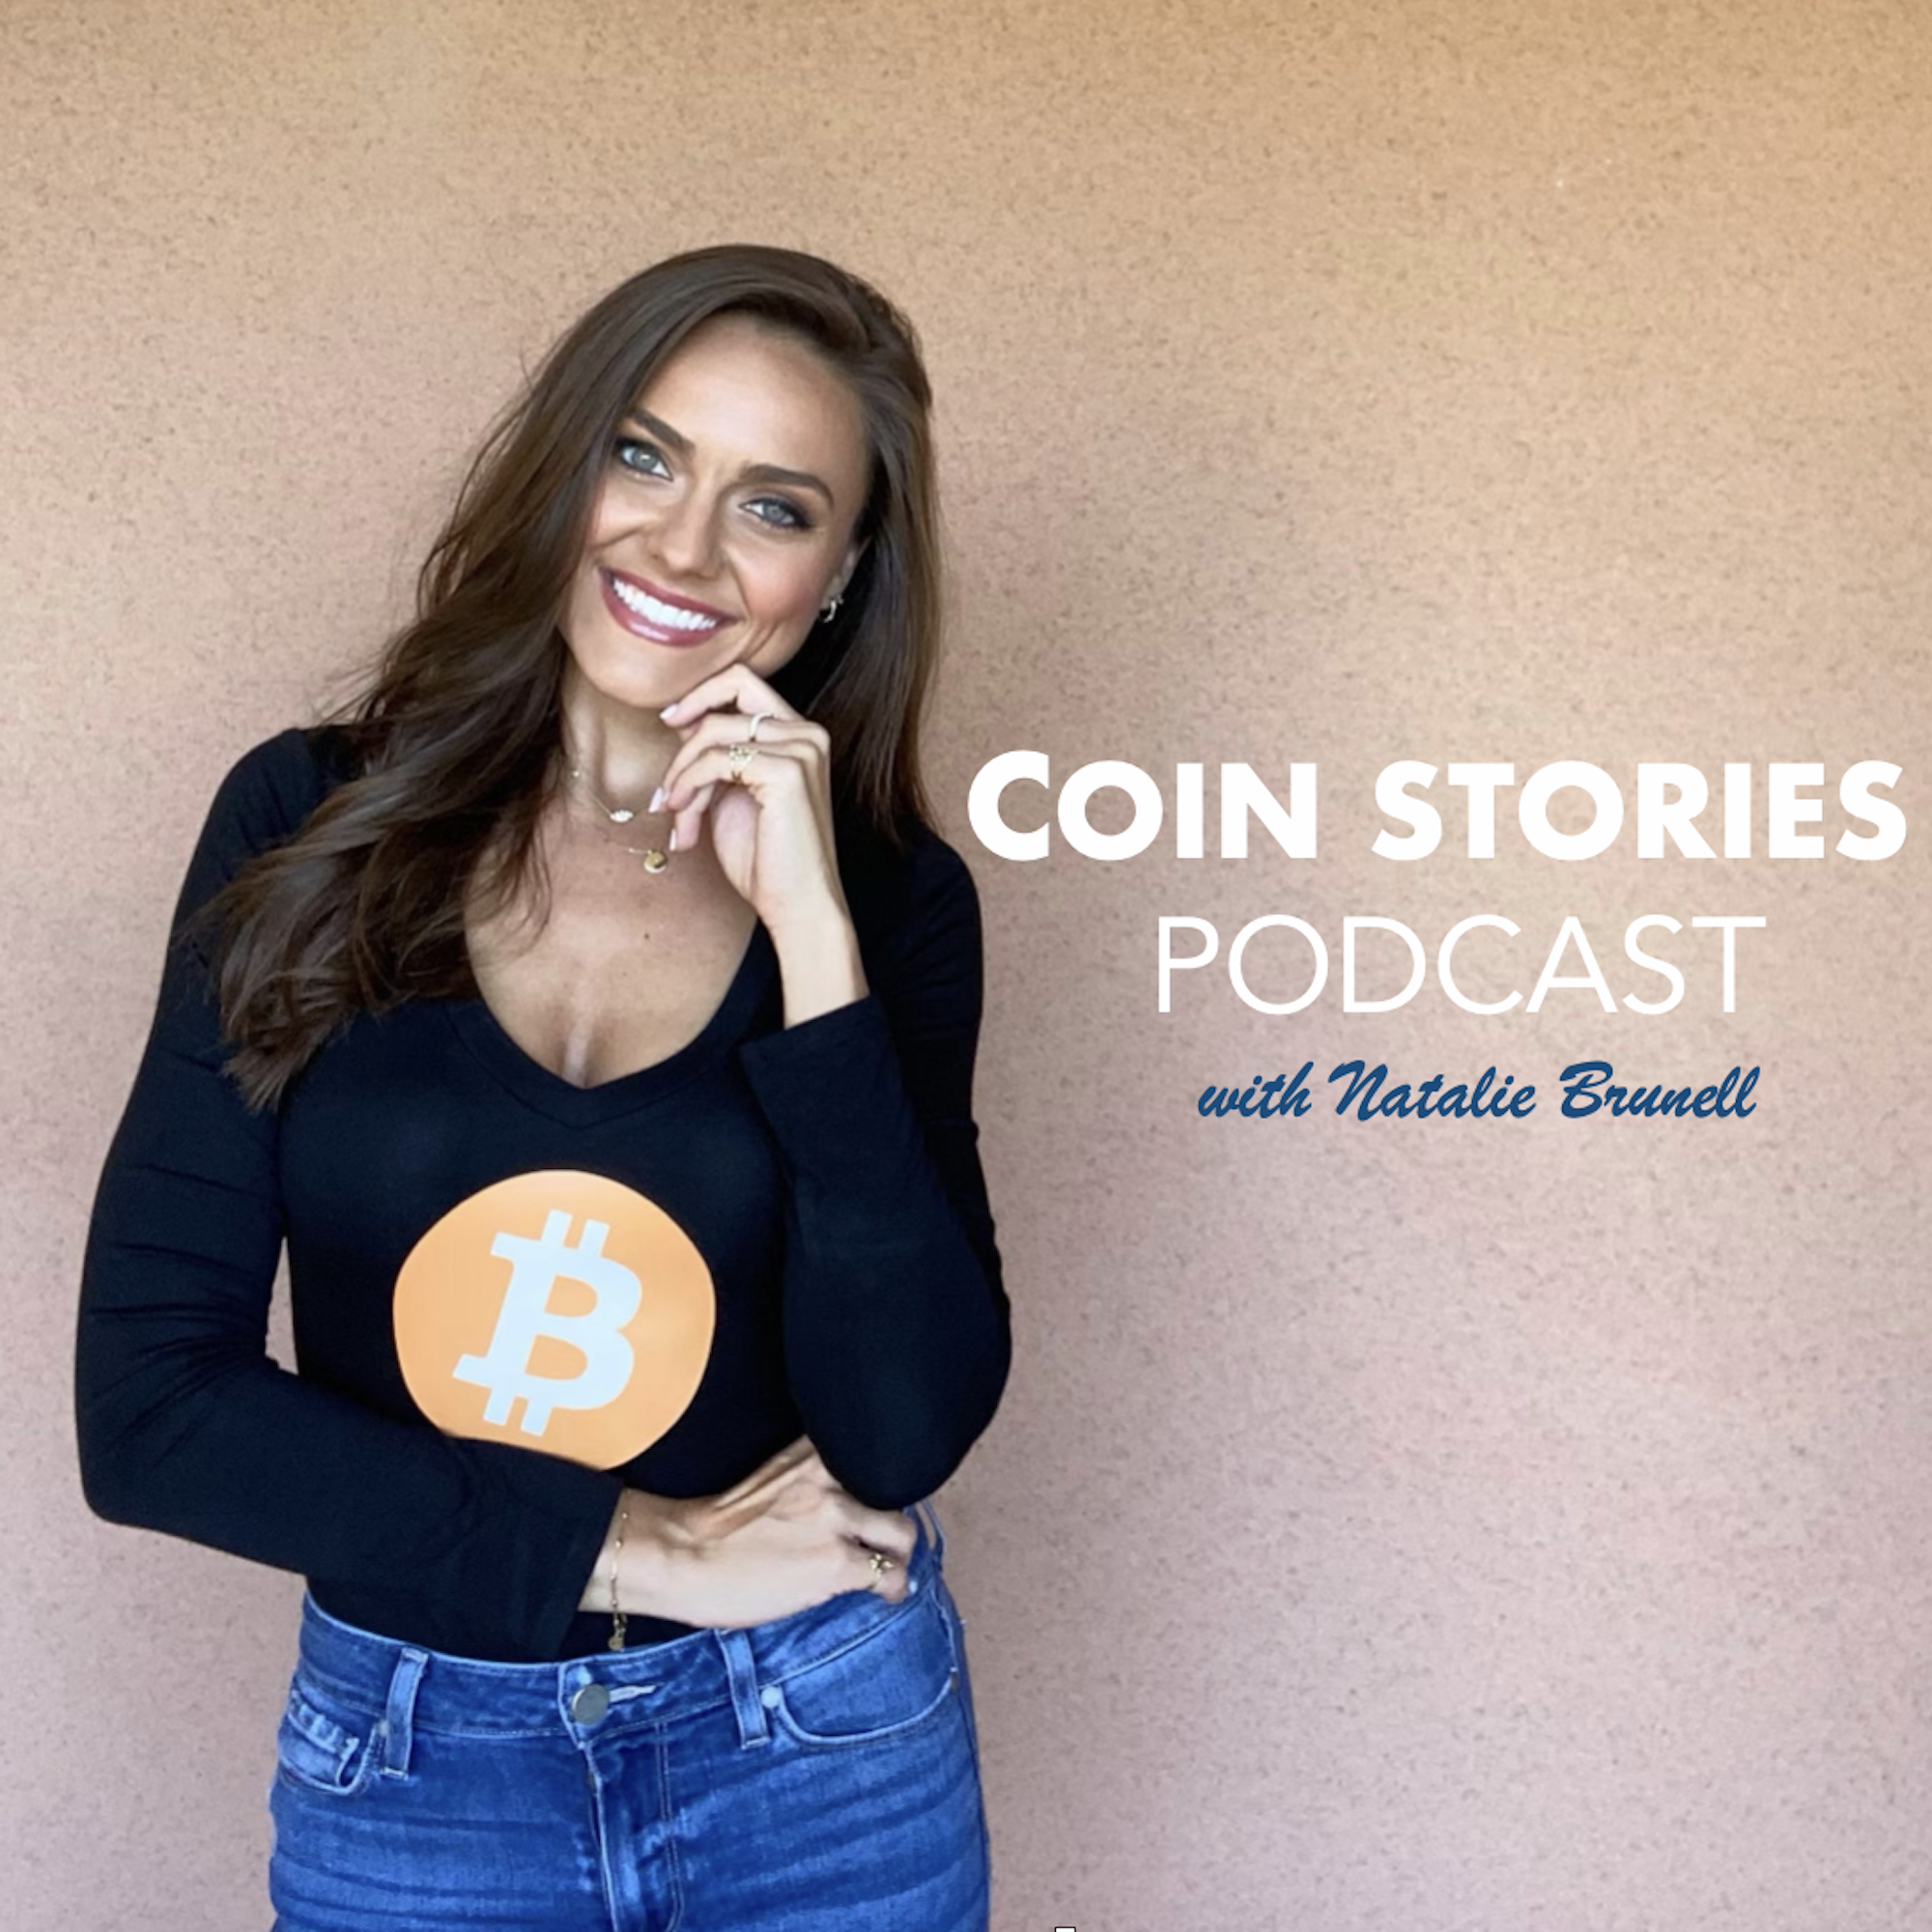 Coin Stories